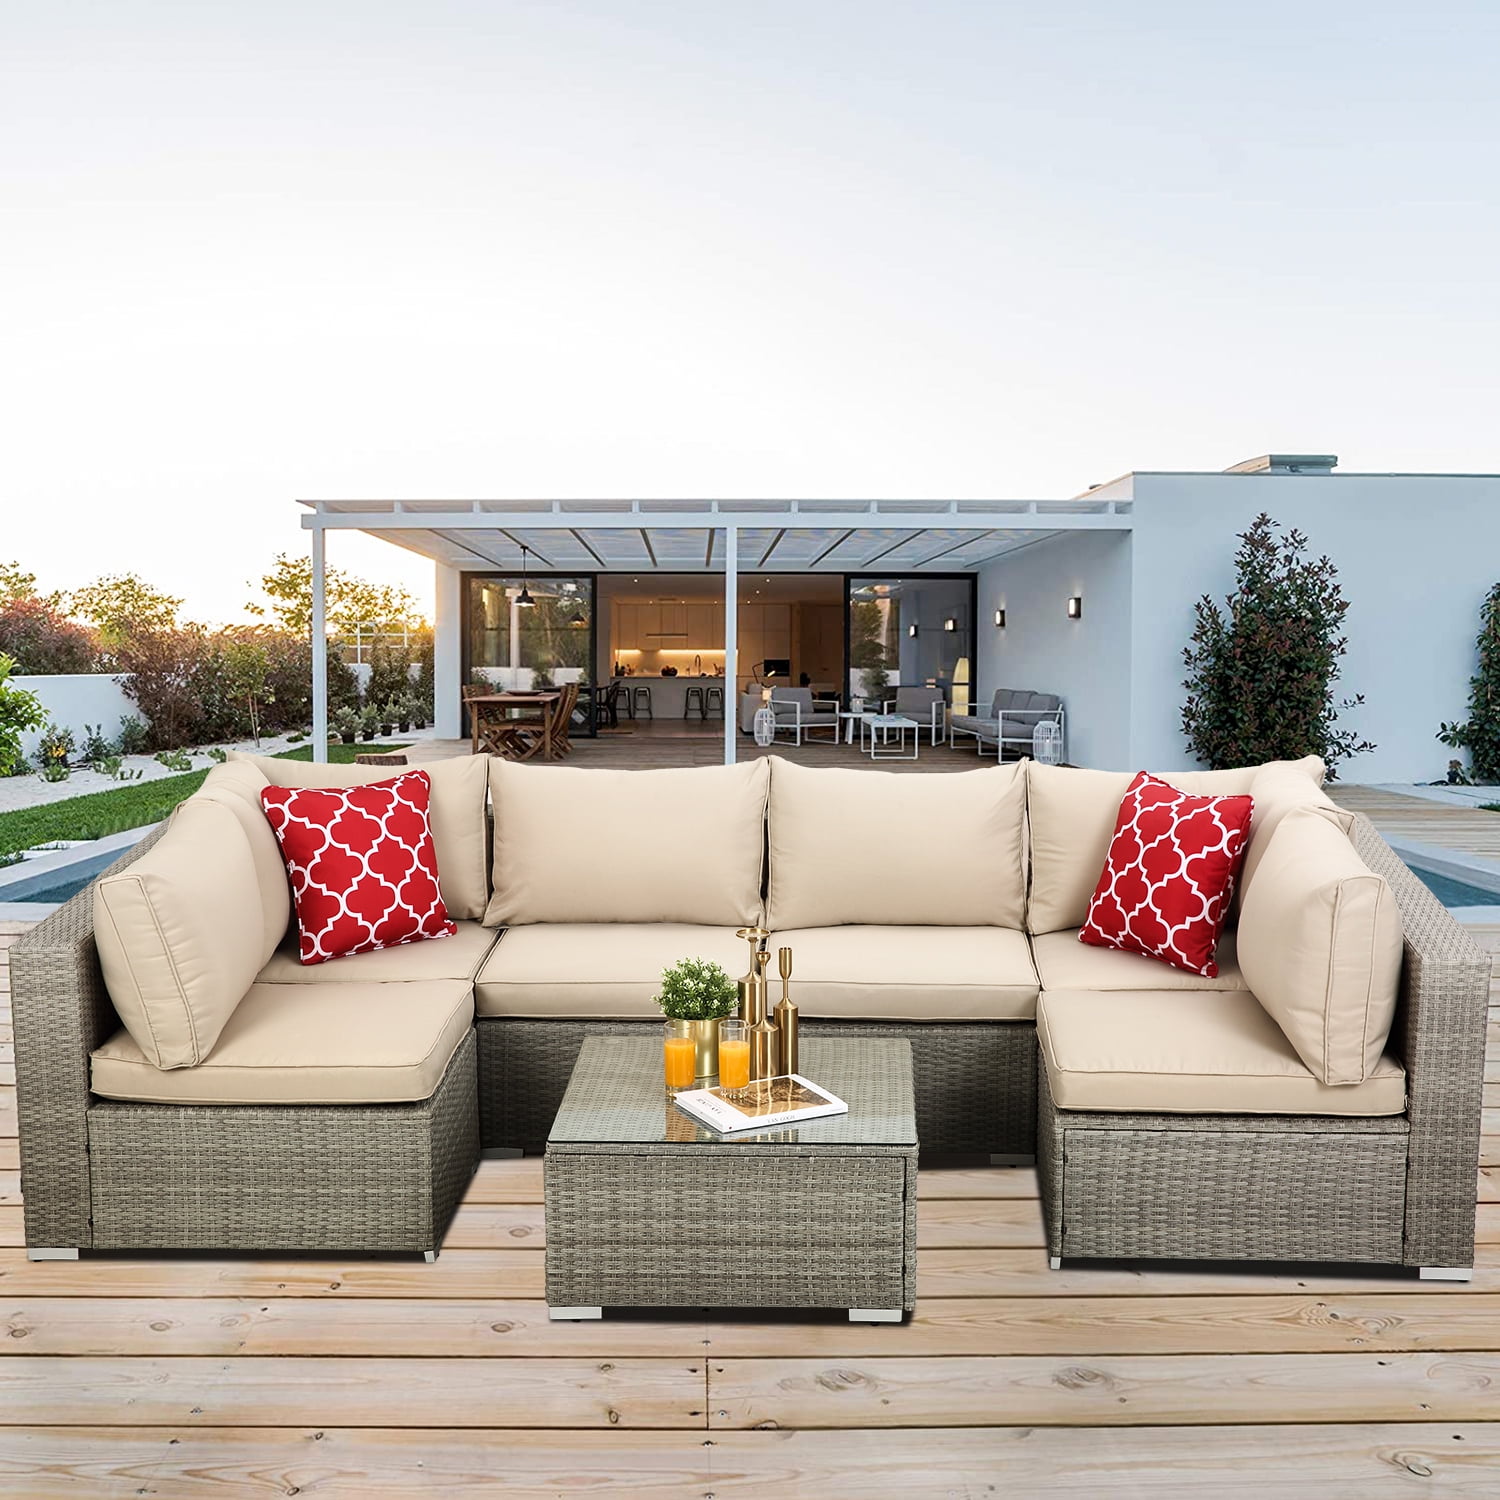 Segmart Outdoor Patio Deck Sectional Sofa Sets, Newest 7 Pieces Wicker Furniture Set with Seat Cushions & Coffee Table, Conversation Sets with 2 Pillows for Porch, Backyard, Beige Cushion, SS643